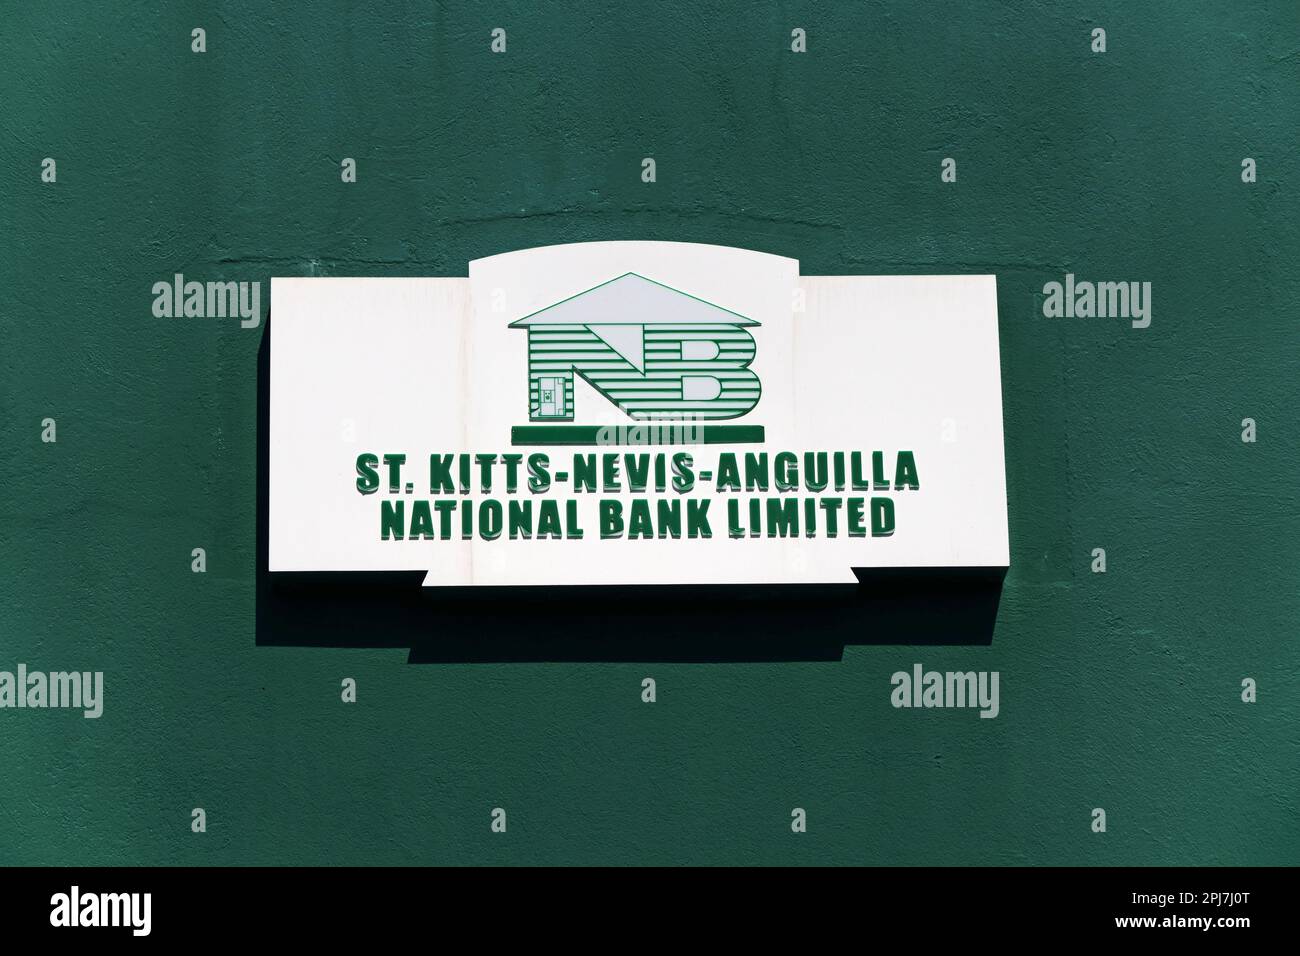 Sign of St Kitts-Nevis-Anguilla National Bank Limited Stock Photo